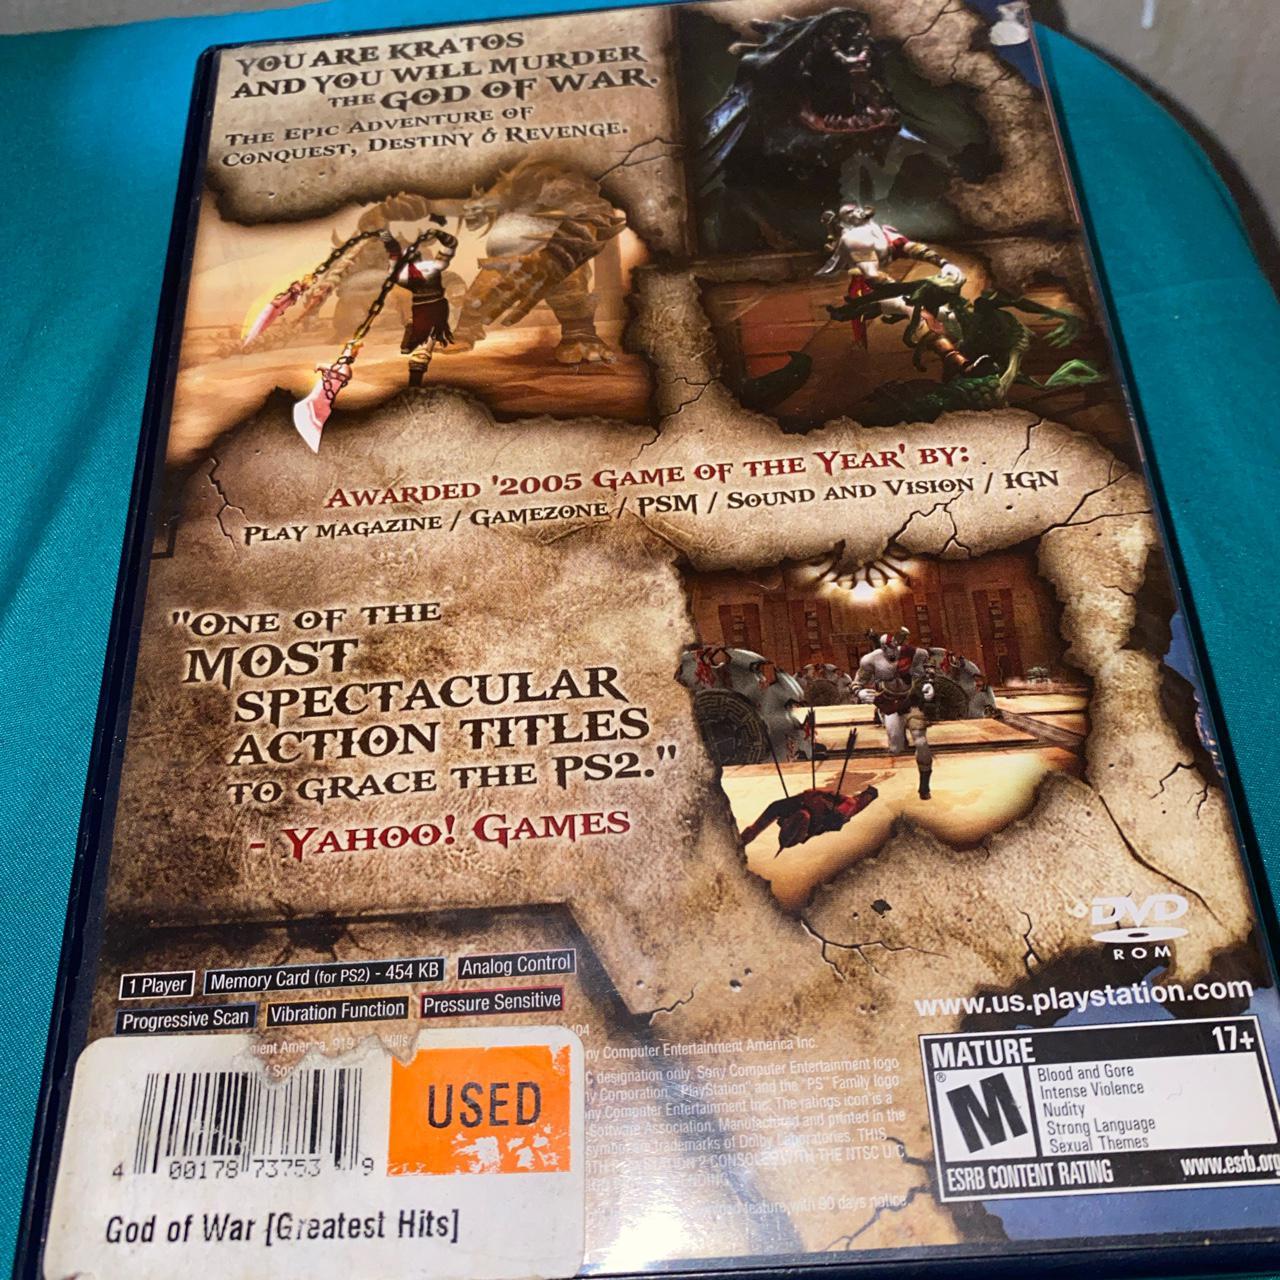 Product Image 2 - GOD OF WAR (PS2)

Greatest hits